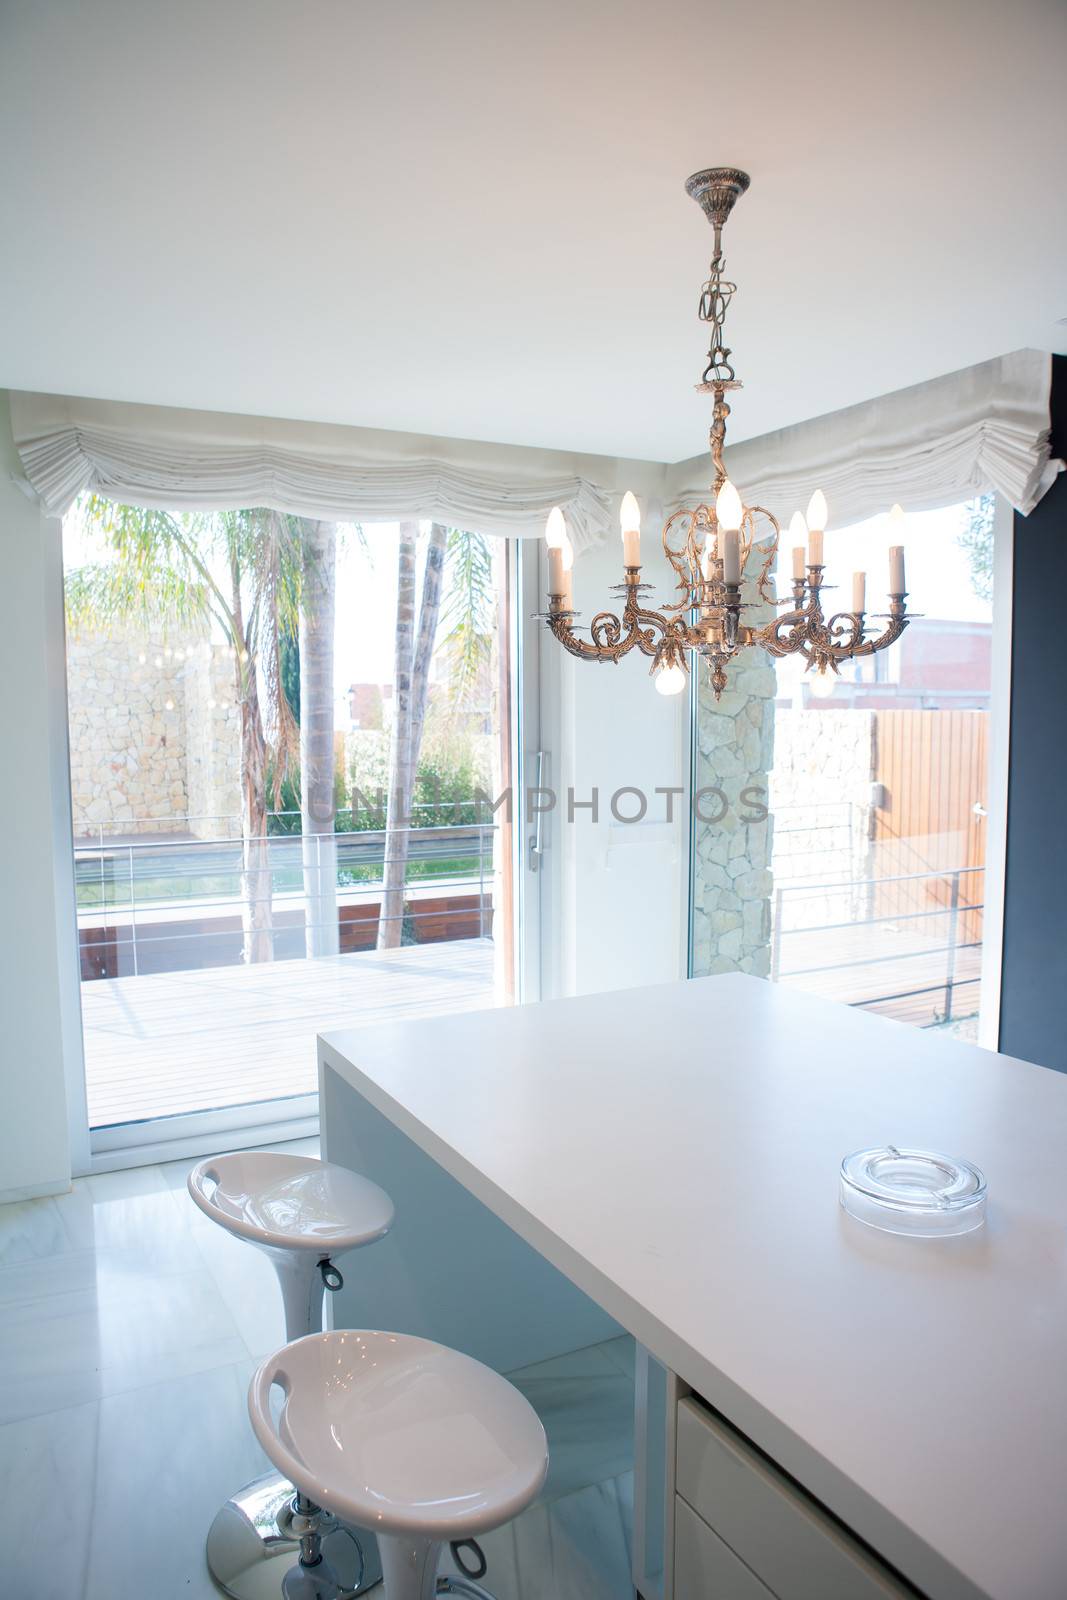 Modern white kitchen table with vintage chandelier and stools